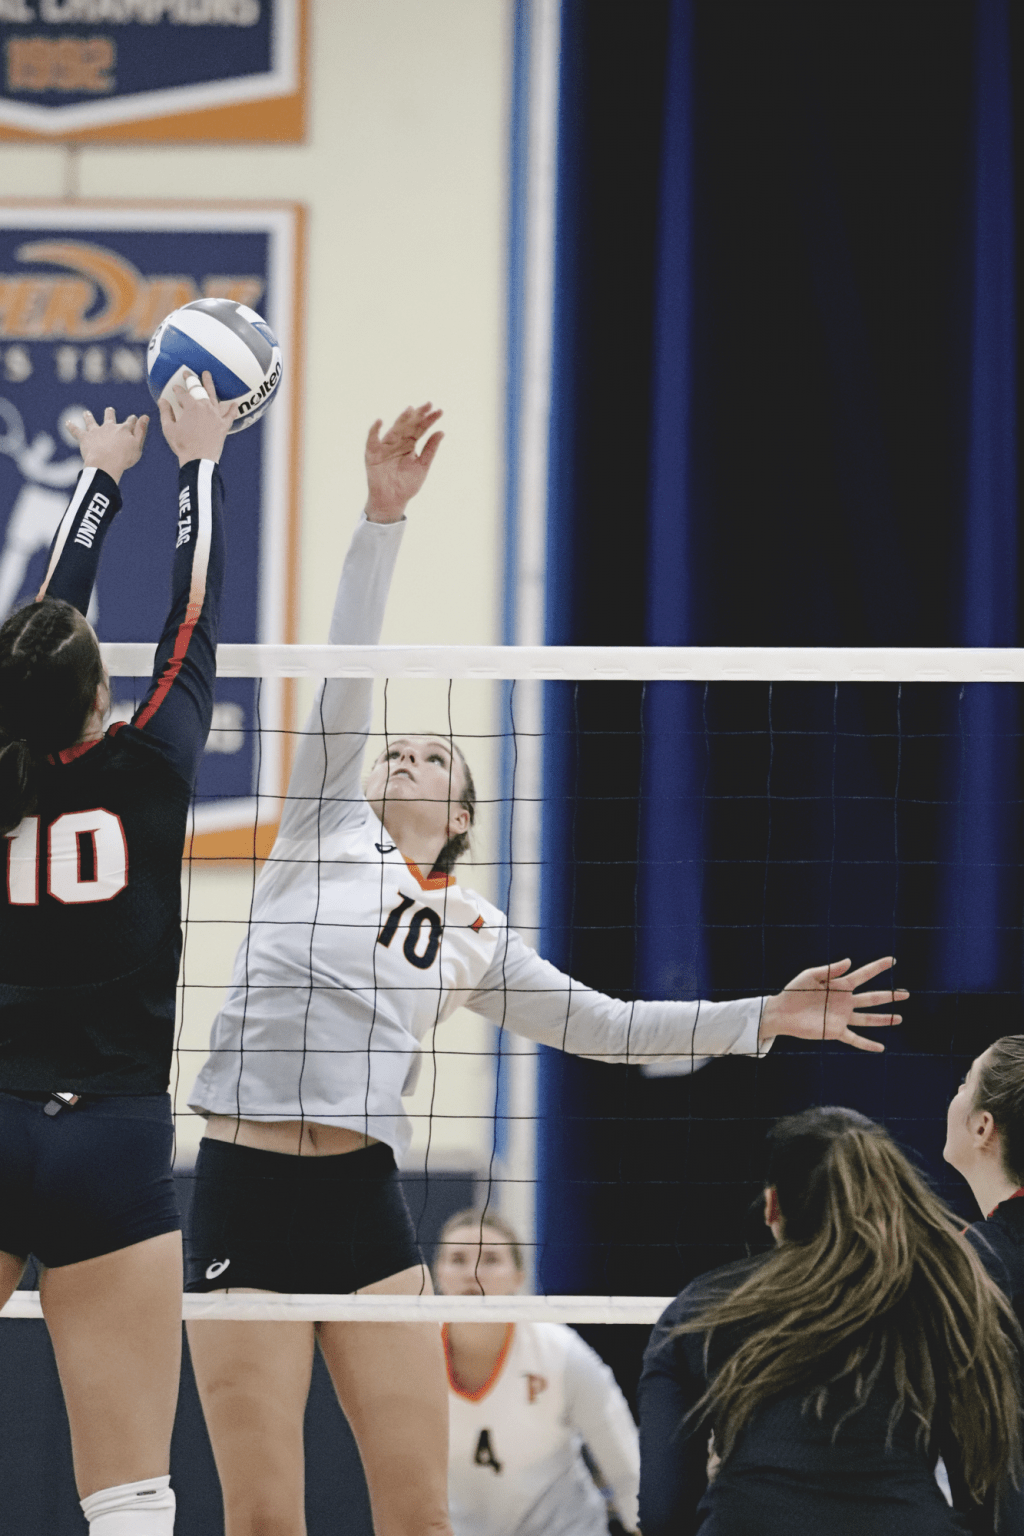 Senior outside hitter Shannon Scully (in white) rises for a tip against Gonzaga redshirt senior Katelyn Oppio during Friday's match. Scully led all hitters with 15 kills and a .469 hitting percentage in the match.